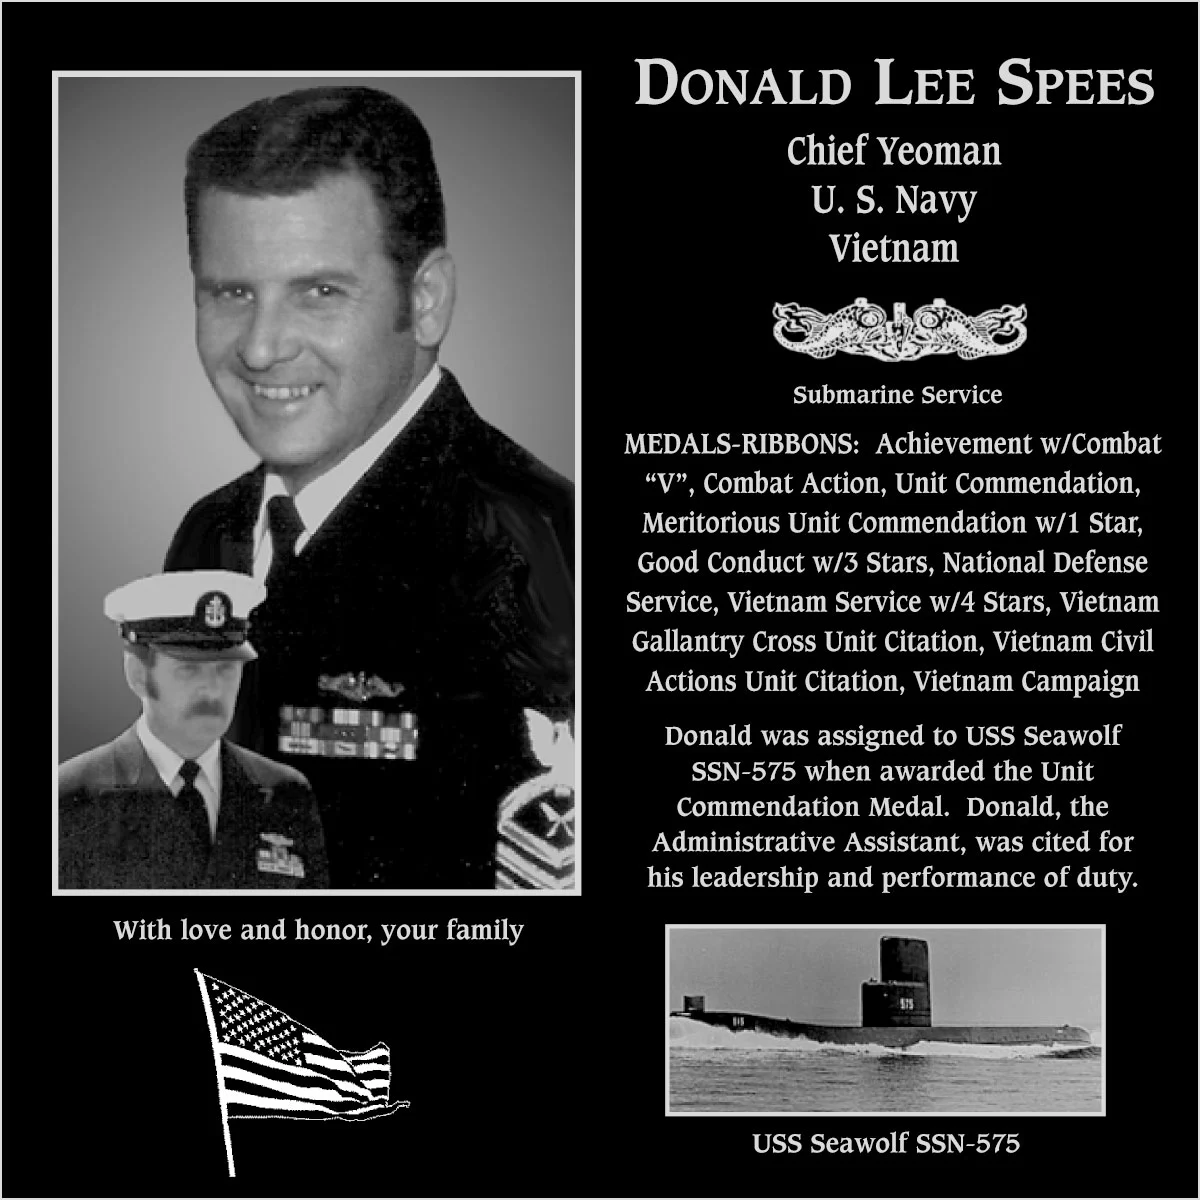 Donald Lee Spees